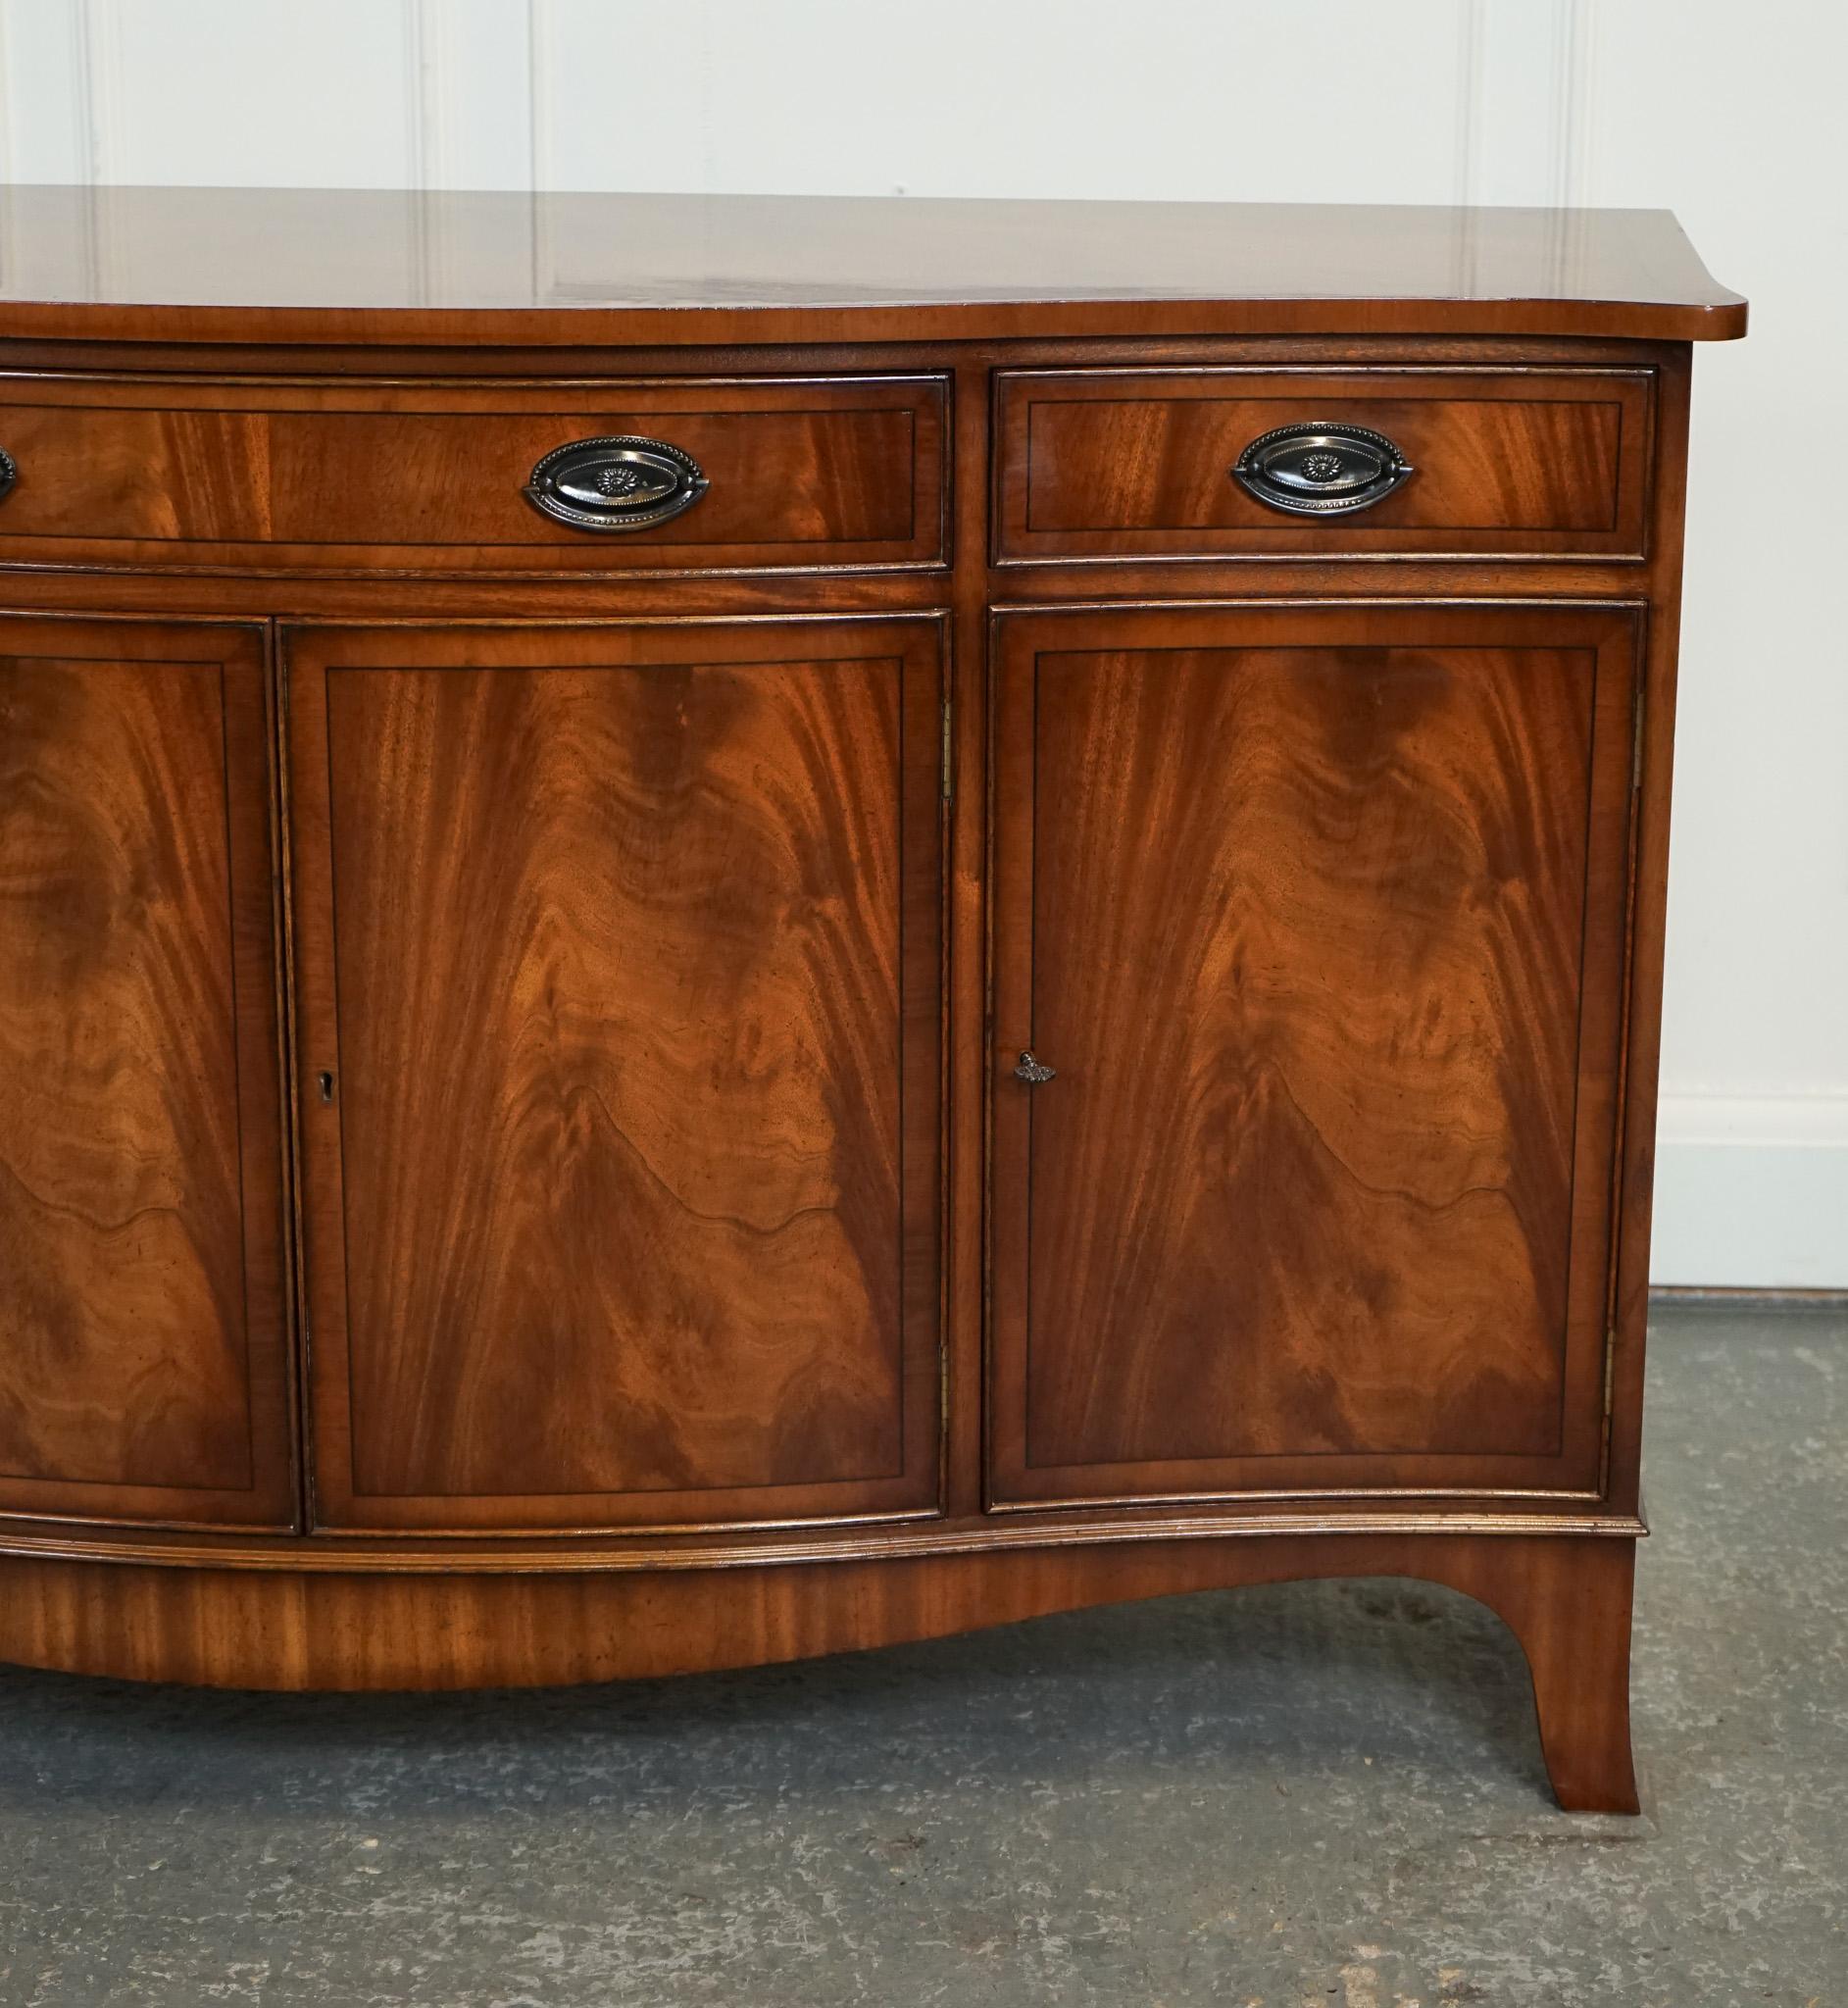 Hand-Crafted BEVAN FUNNEL SERPENTINE GEORGIAN STYLE BOW FRONTED SiDEBOARD LOTS OF STORAGE